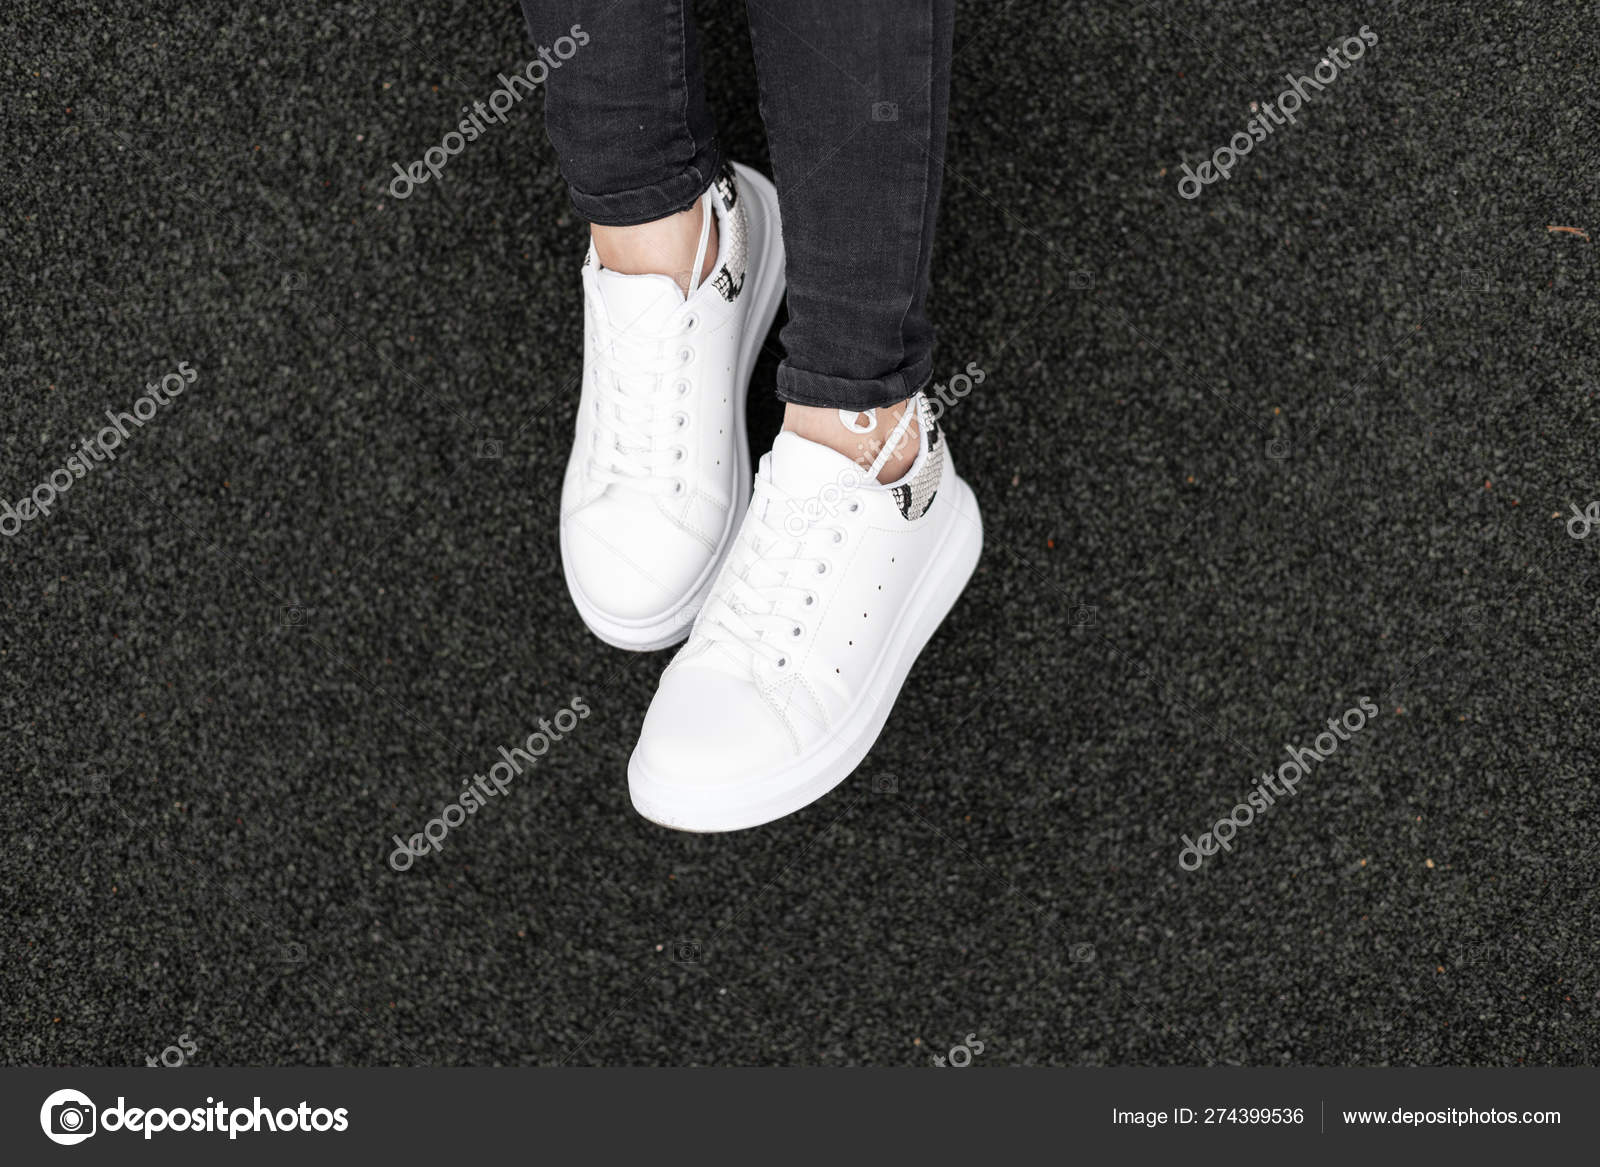 stylish leather sneakers